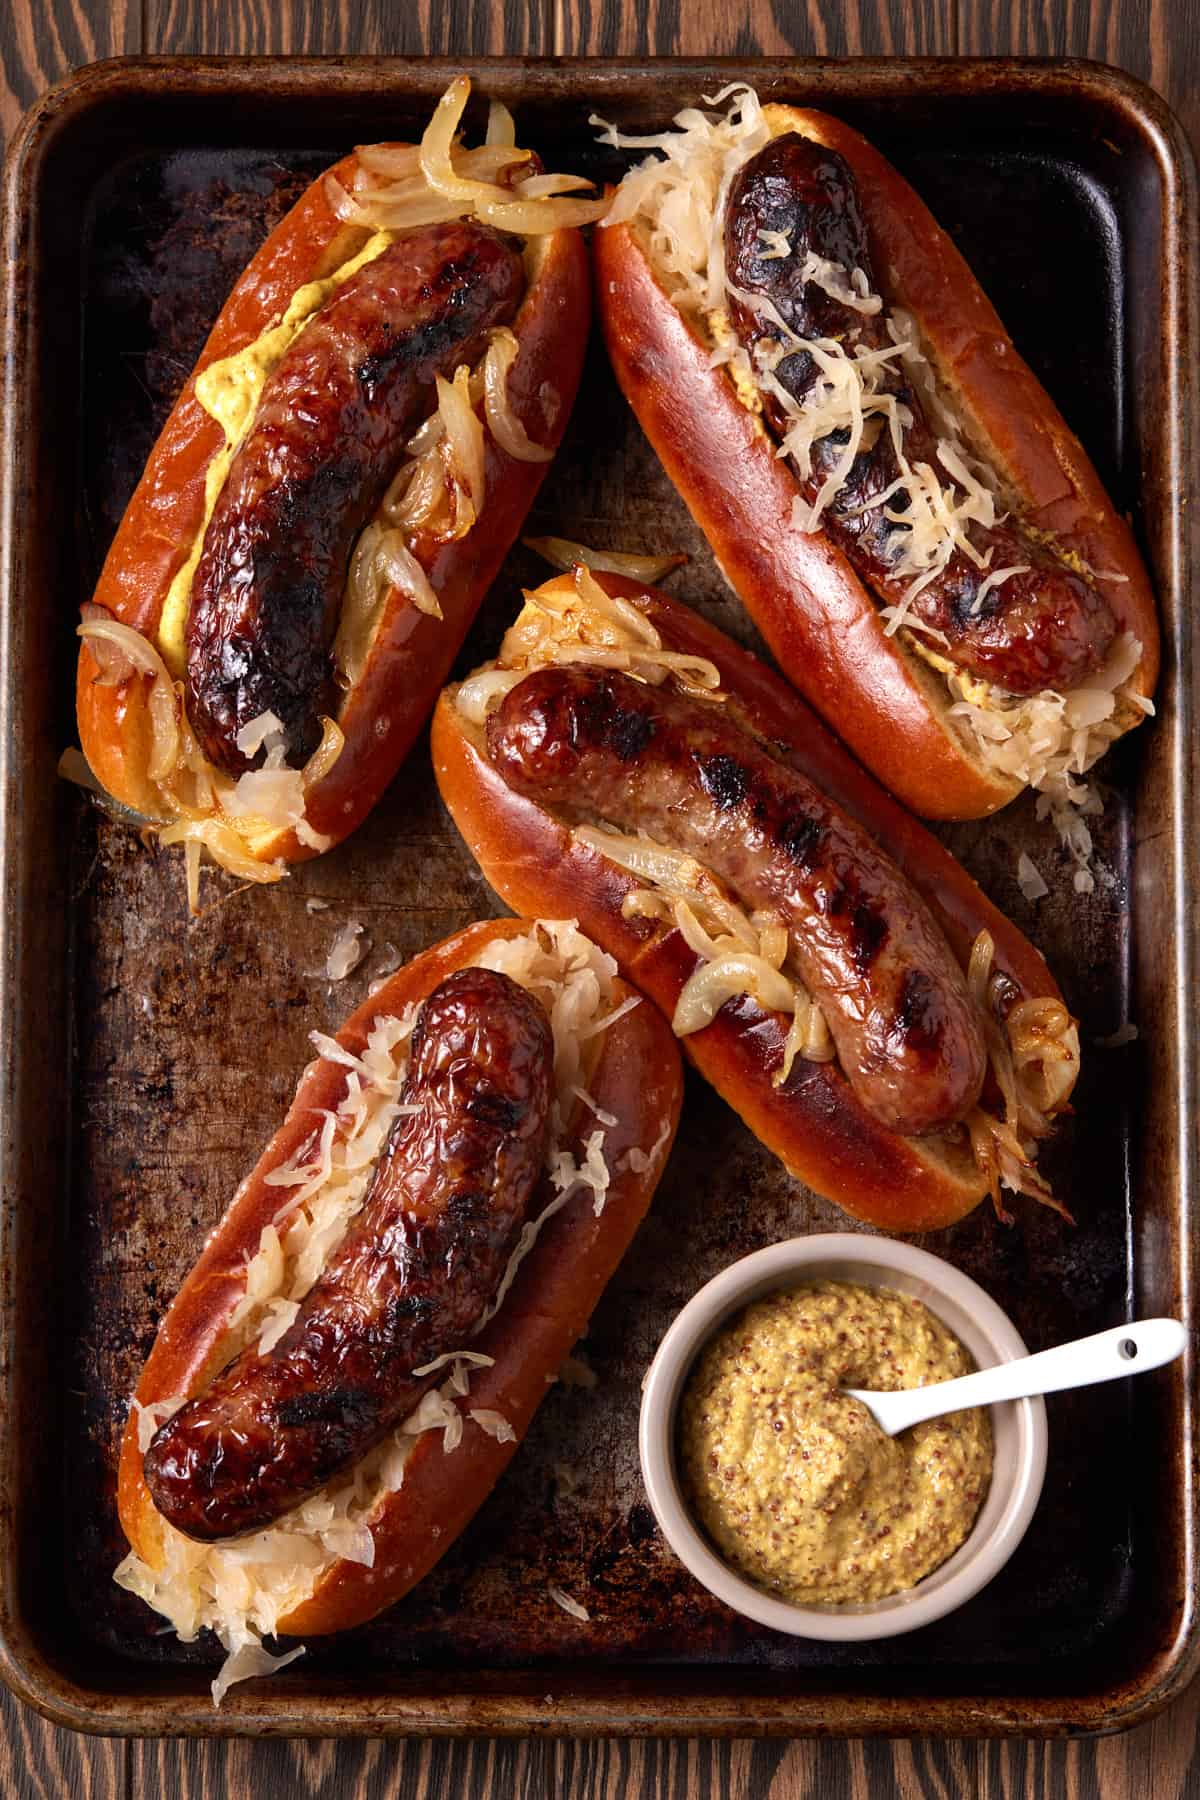 Grilled brats in buns on sheet pan.